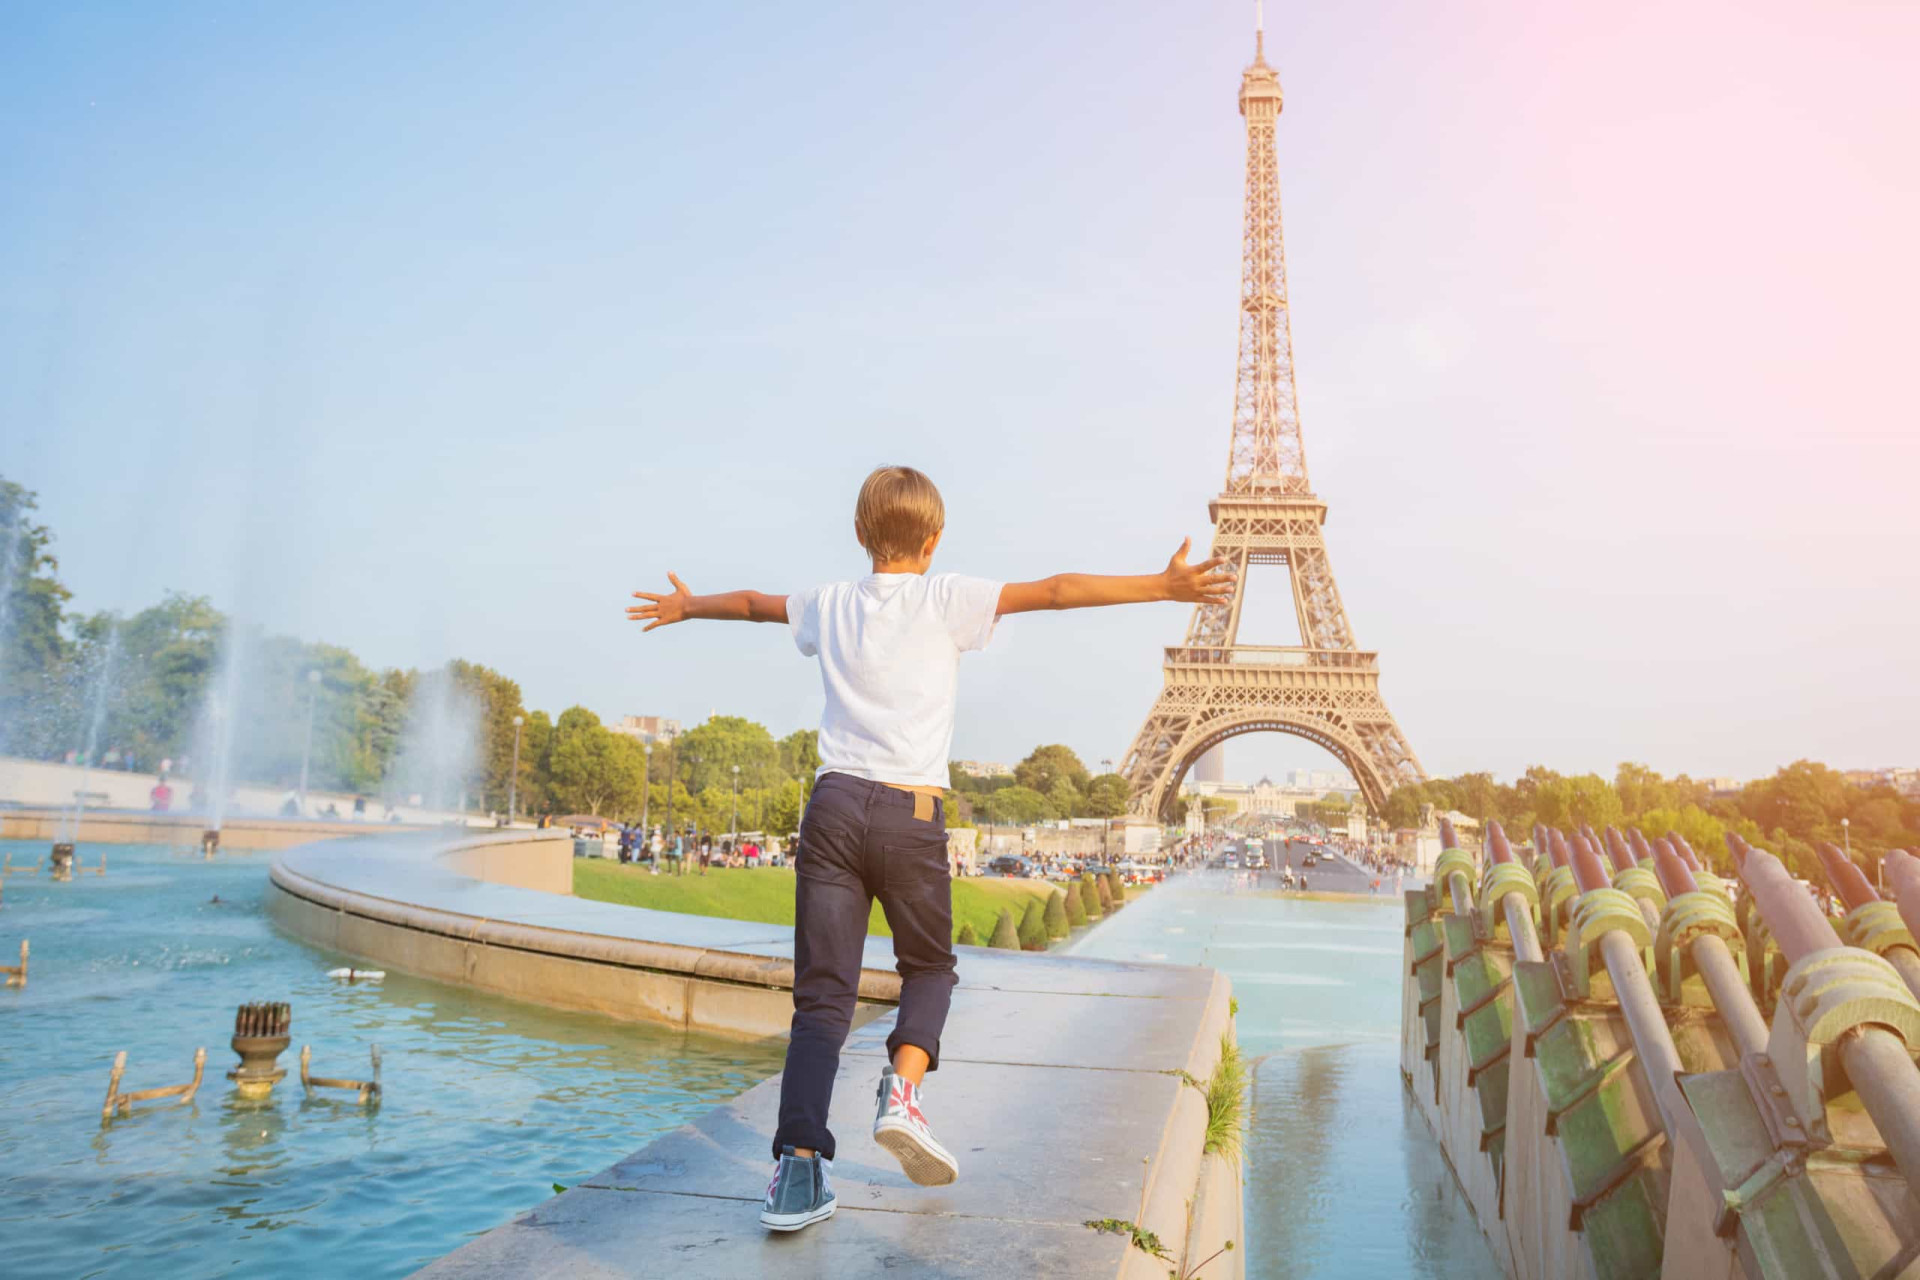 <p>The Eiffel Tower is impressive whether you're five or 55, and it's just one of the big-ticket attractions that make Paris a good bet for a family break. Pack babies into a sling to admire the many galleries and museums, although older children may be more excited about Disneyland Paris!</p><p>You may also like:<a href="https://www.starsinsider.com/n/457876?utm_source=msn.com&utm_medium=display&utm_campaign=referral_description&utm_content=481299v1en-en"> Funniest sayings from around the world</a></p>